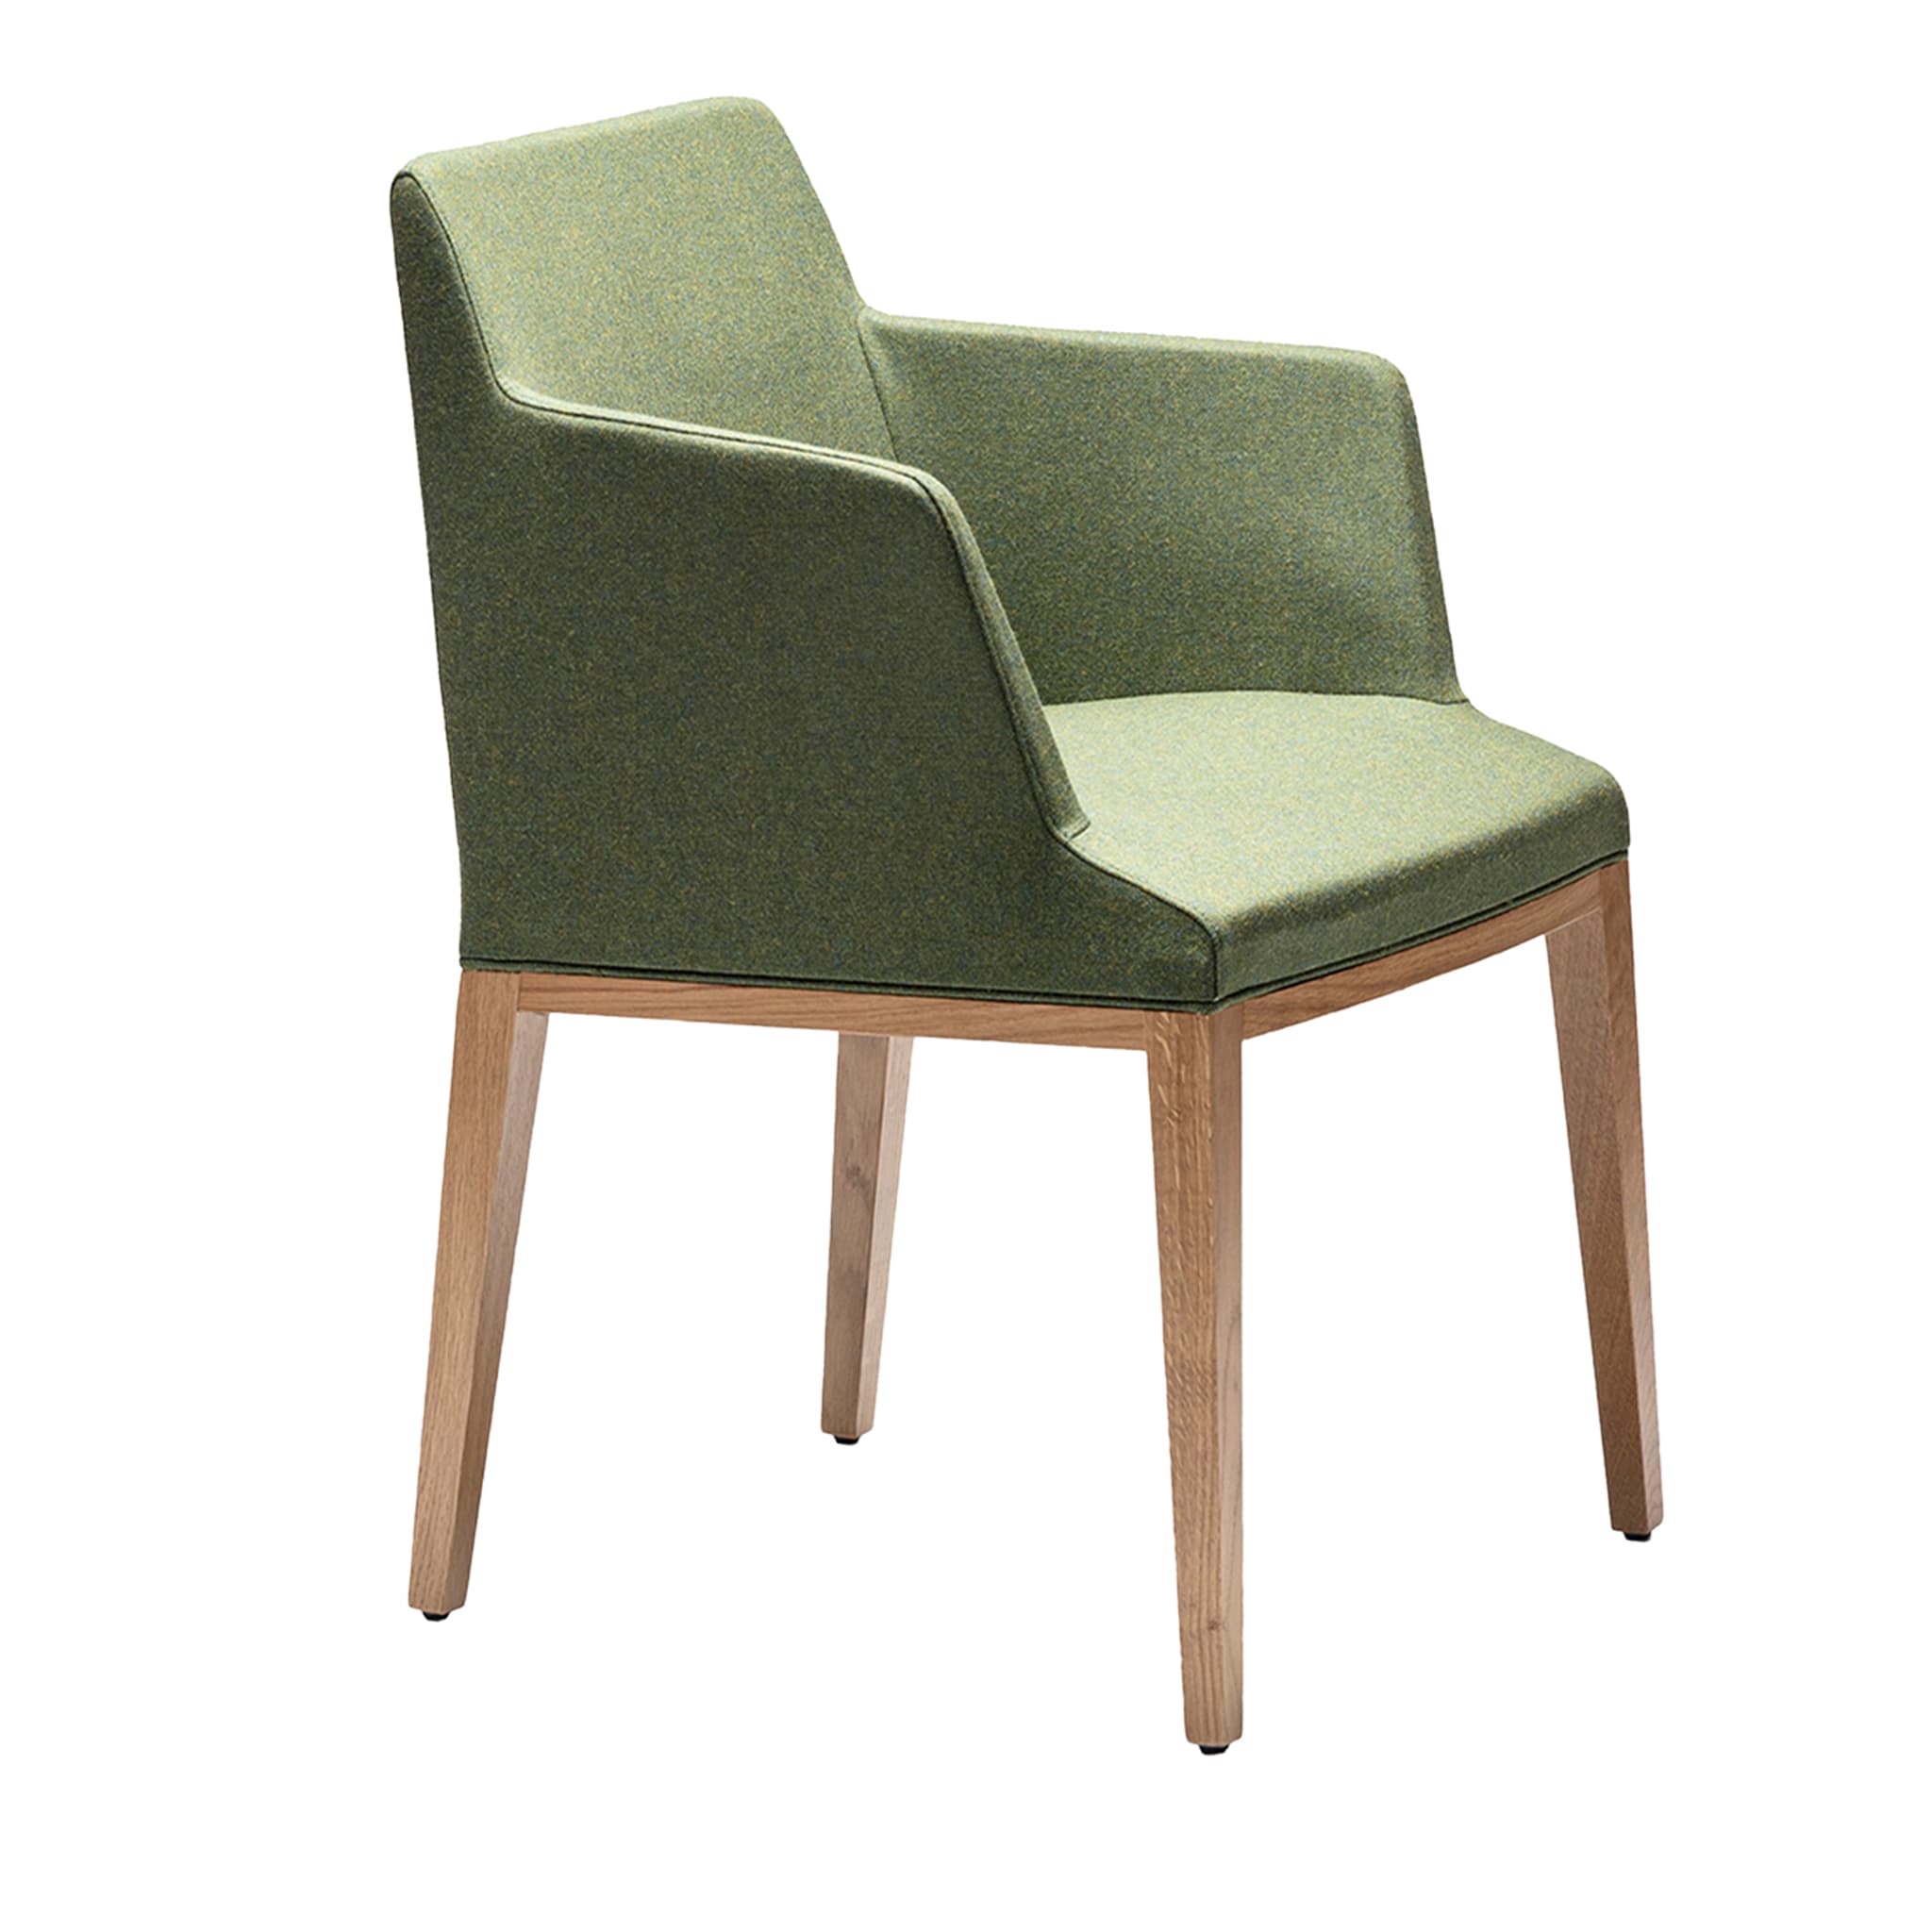 Bloom SP Green Chair by Dario Delpin - Main view